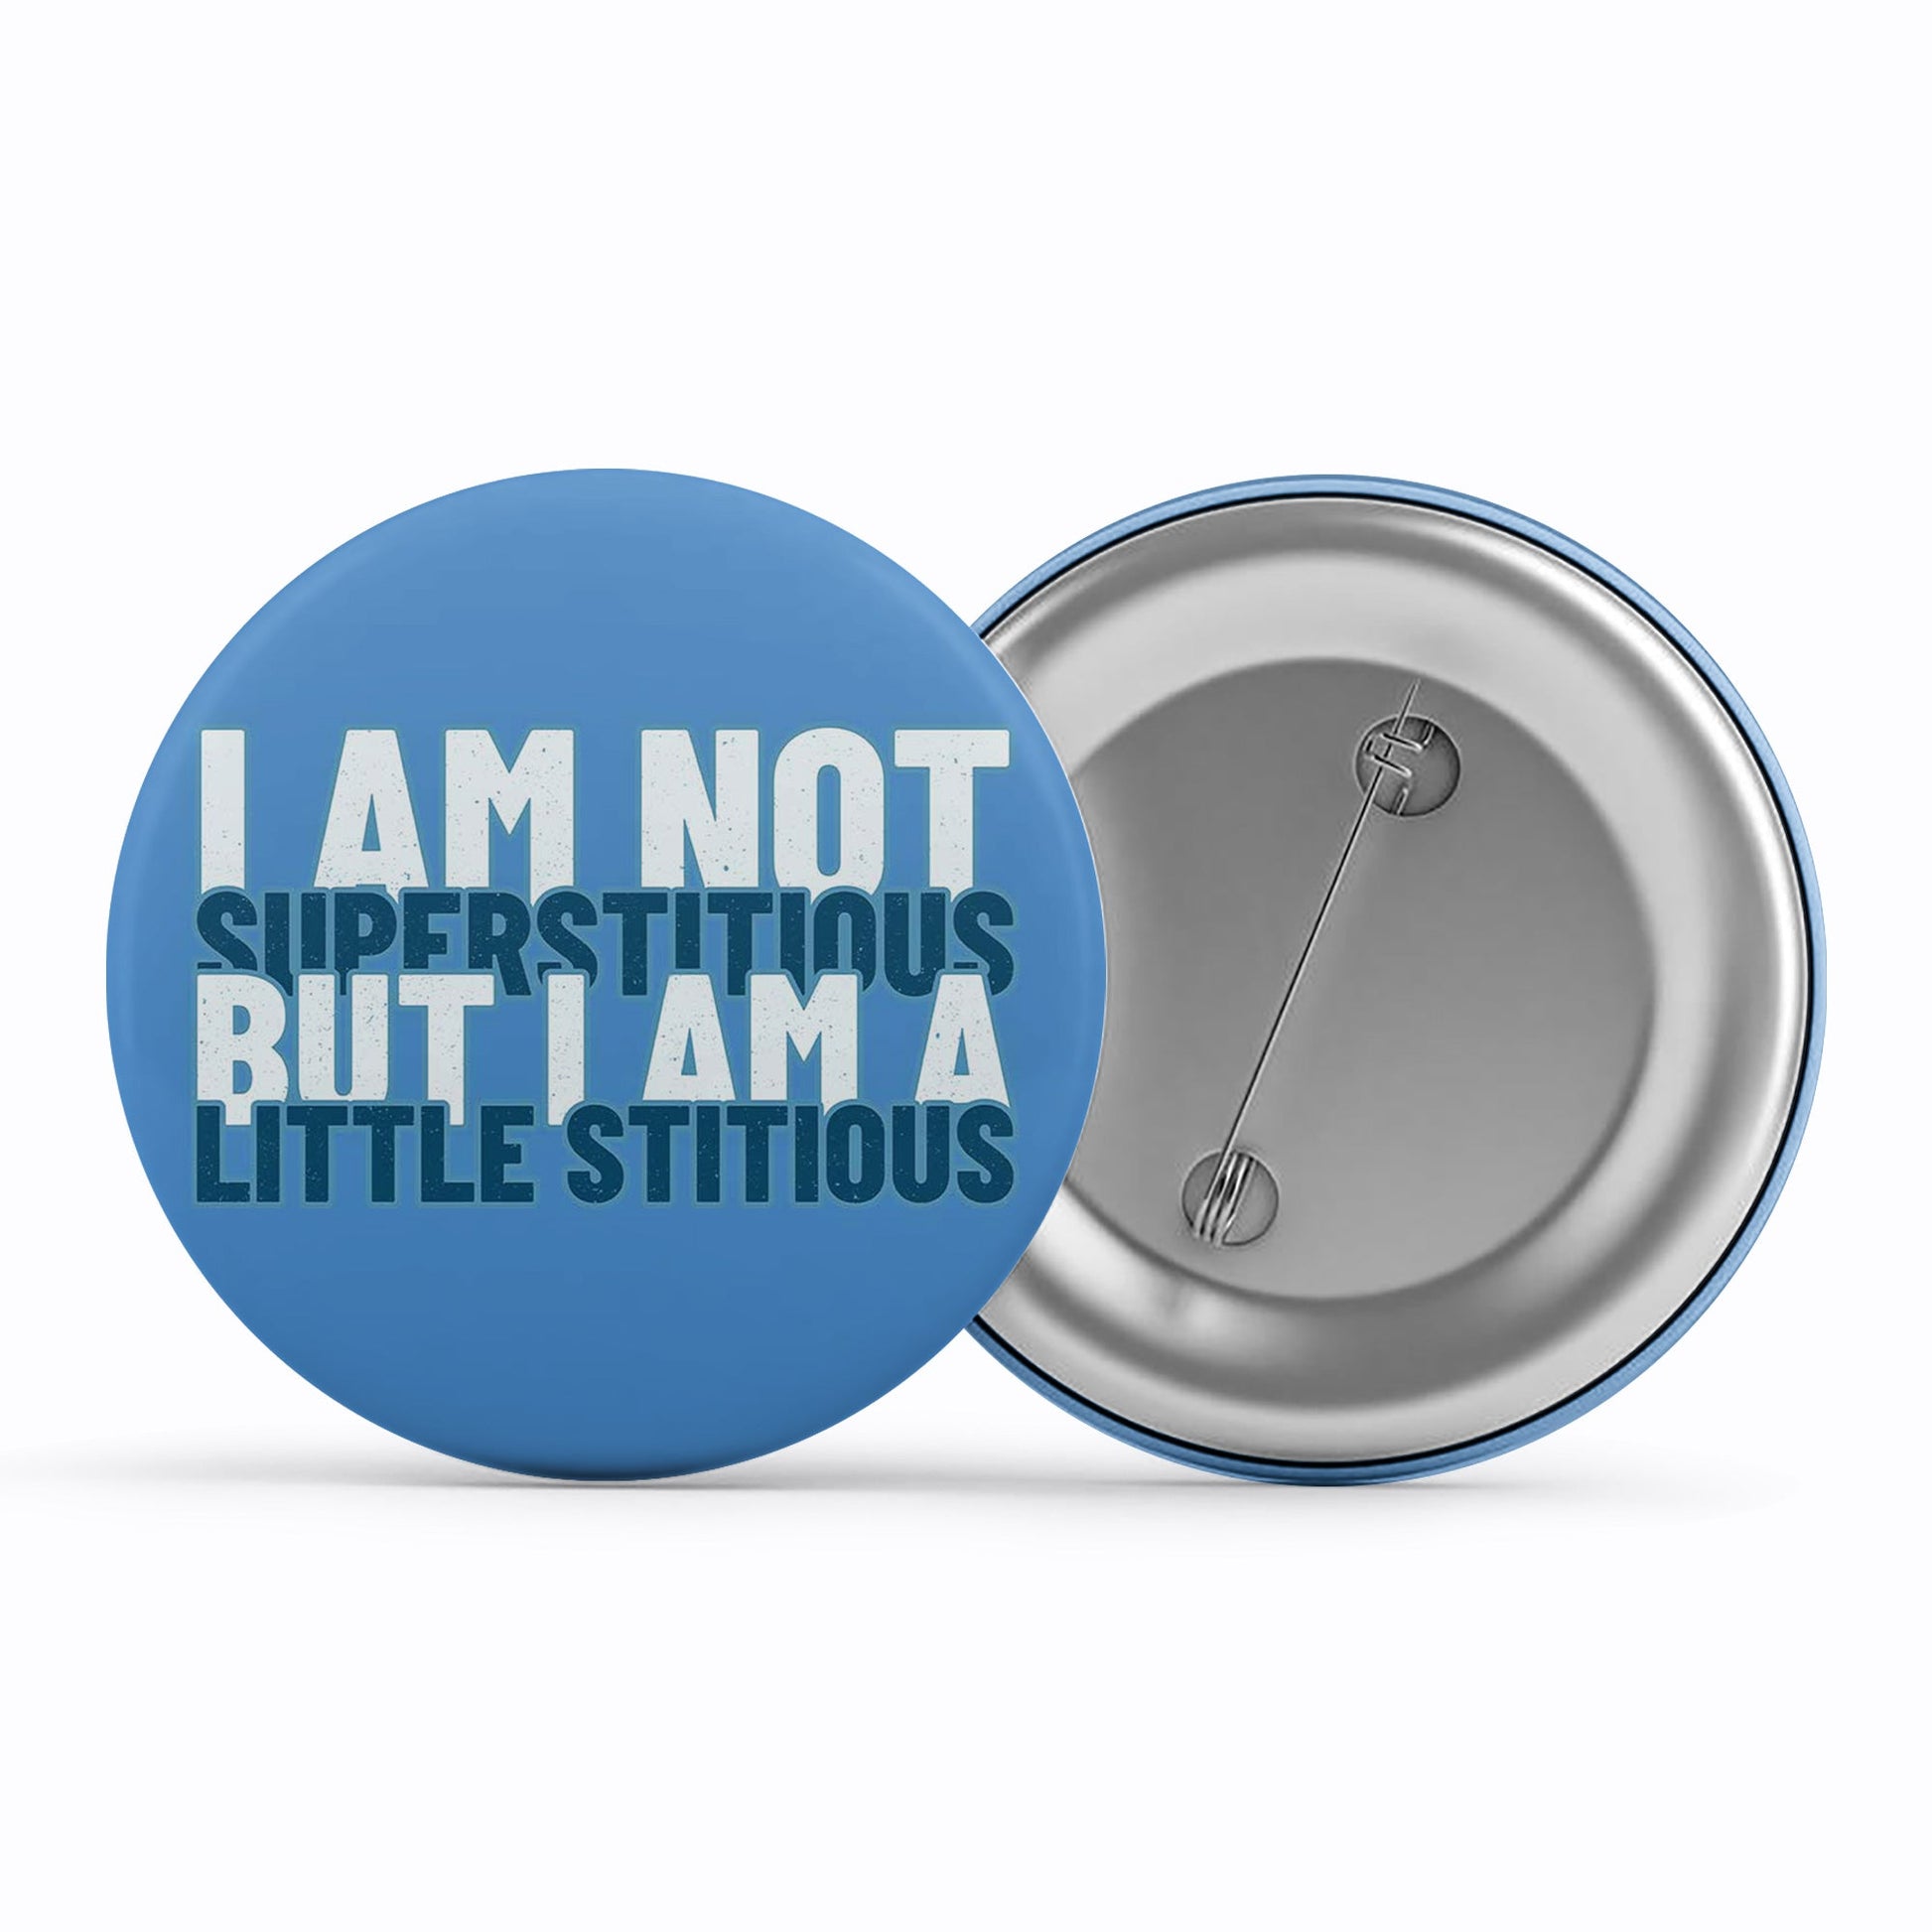 the office i am not superstitious i am a little stitious badge pin button tv & movies buy online india the banyan tee tbt men women girls boys unisex  - michael scott quote